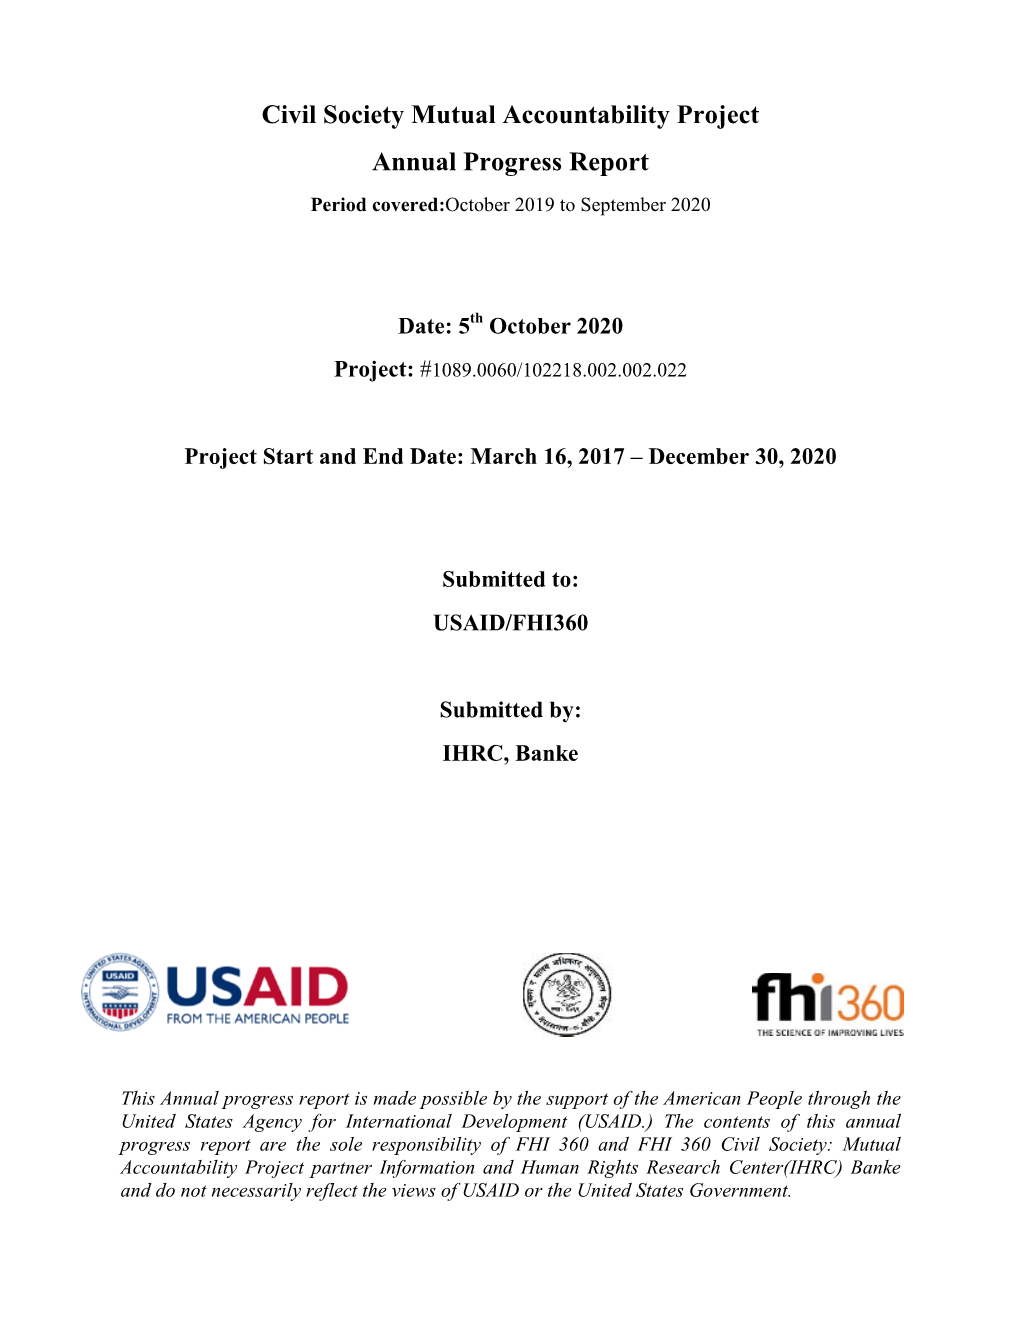 Civil Society Mutual Accountability Project Annual Progress Report Period Covered:October 2019 to September 2020